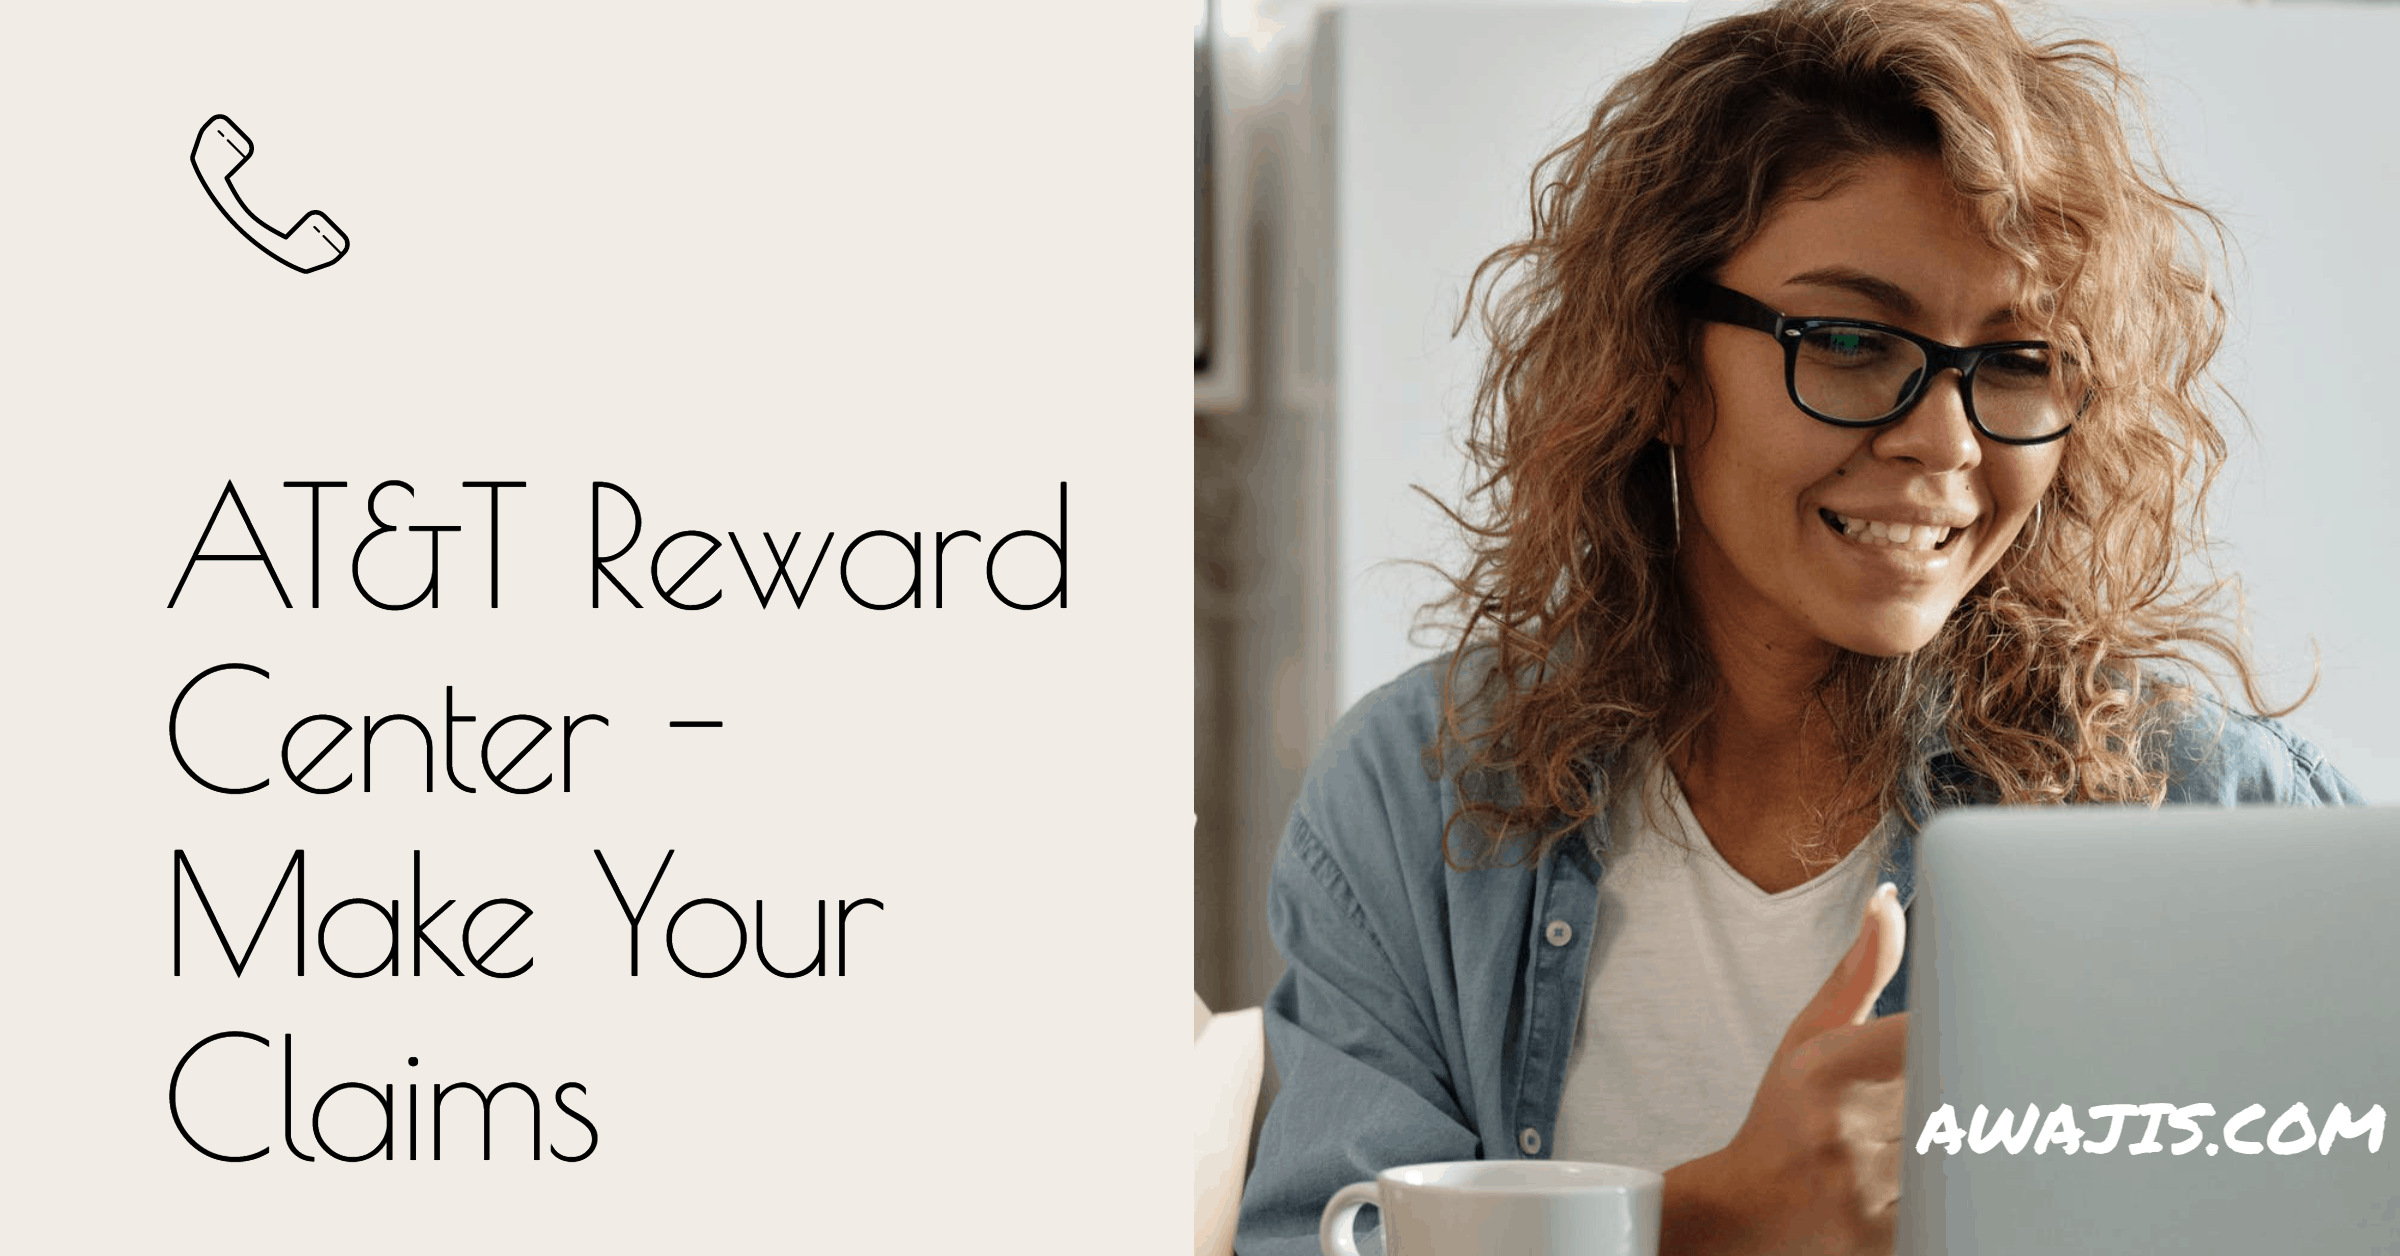 at-t-reward-center-how-to-make-your-claim-at-at-and-t-rewards-center